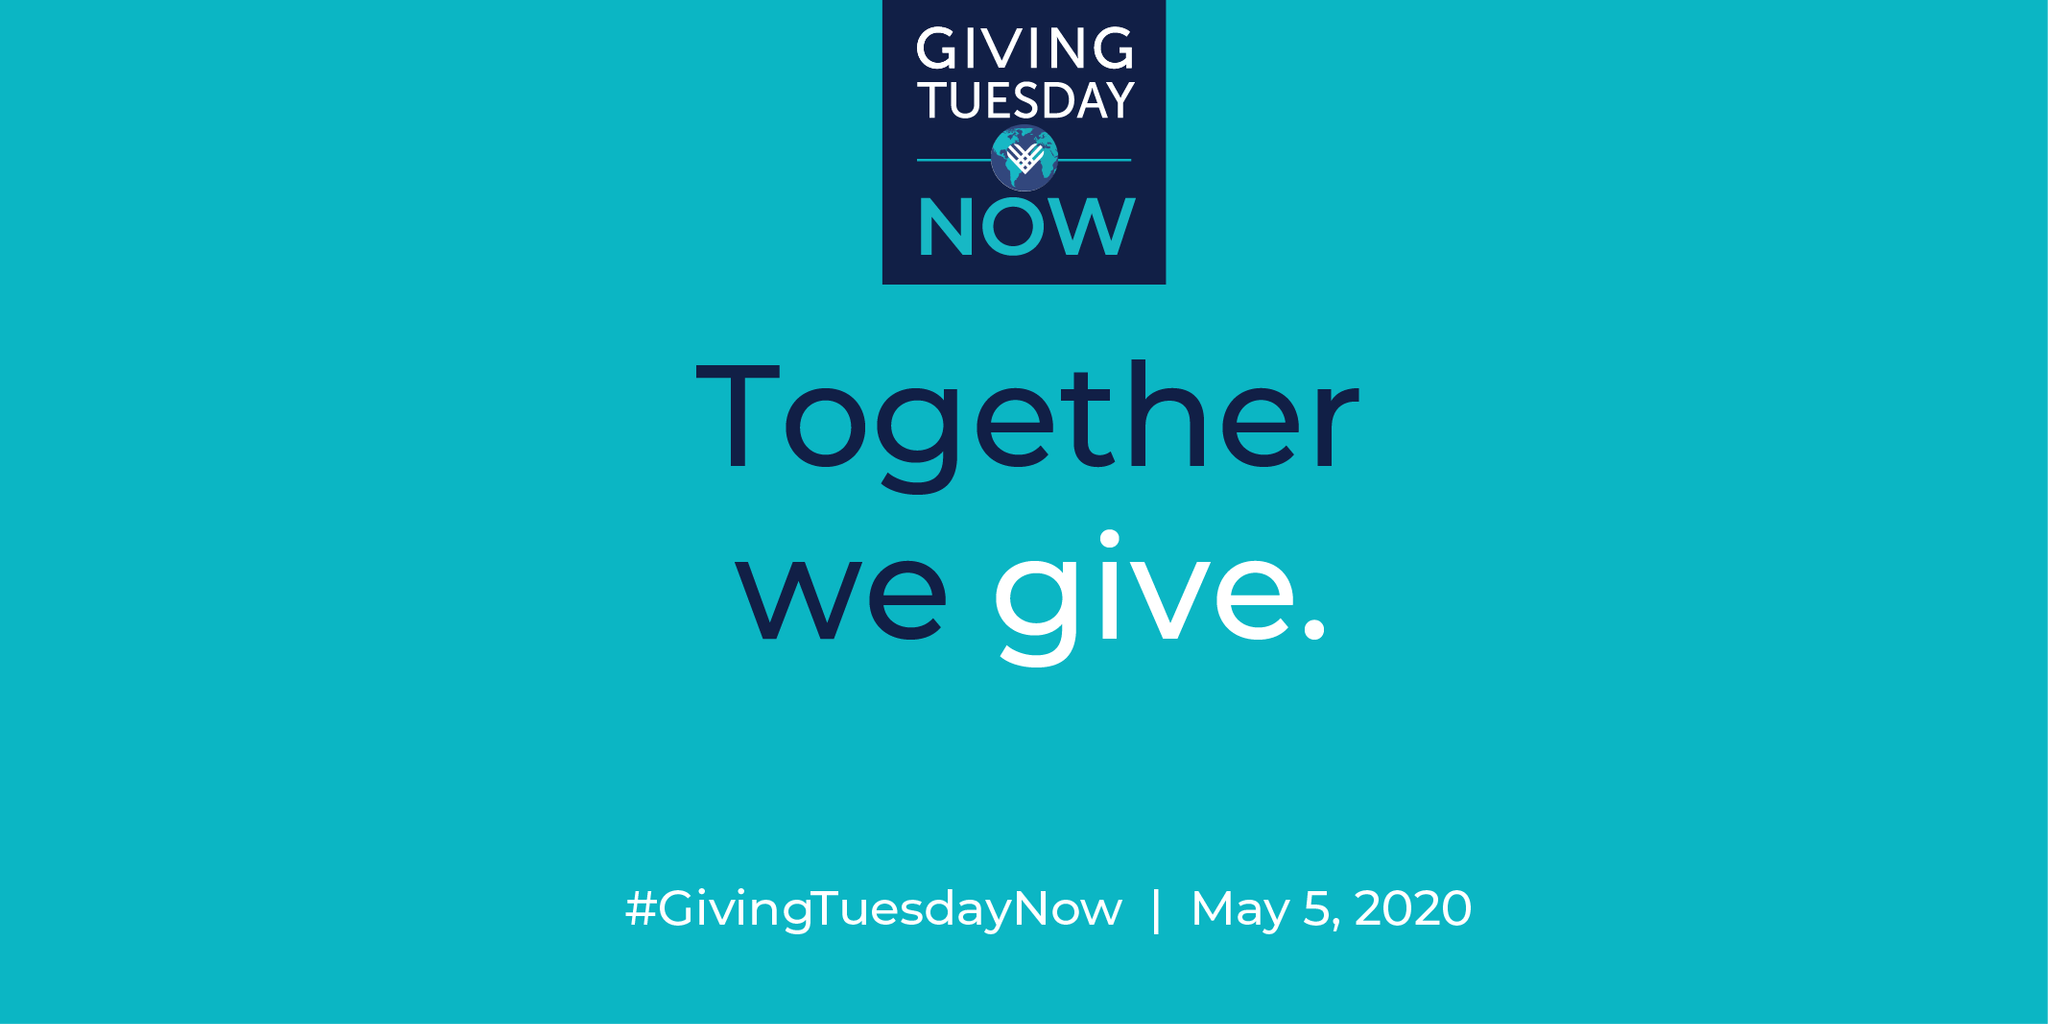 Giving Tuesday Now graphic